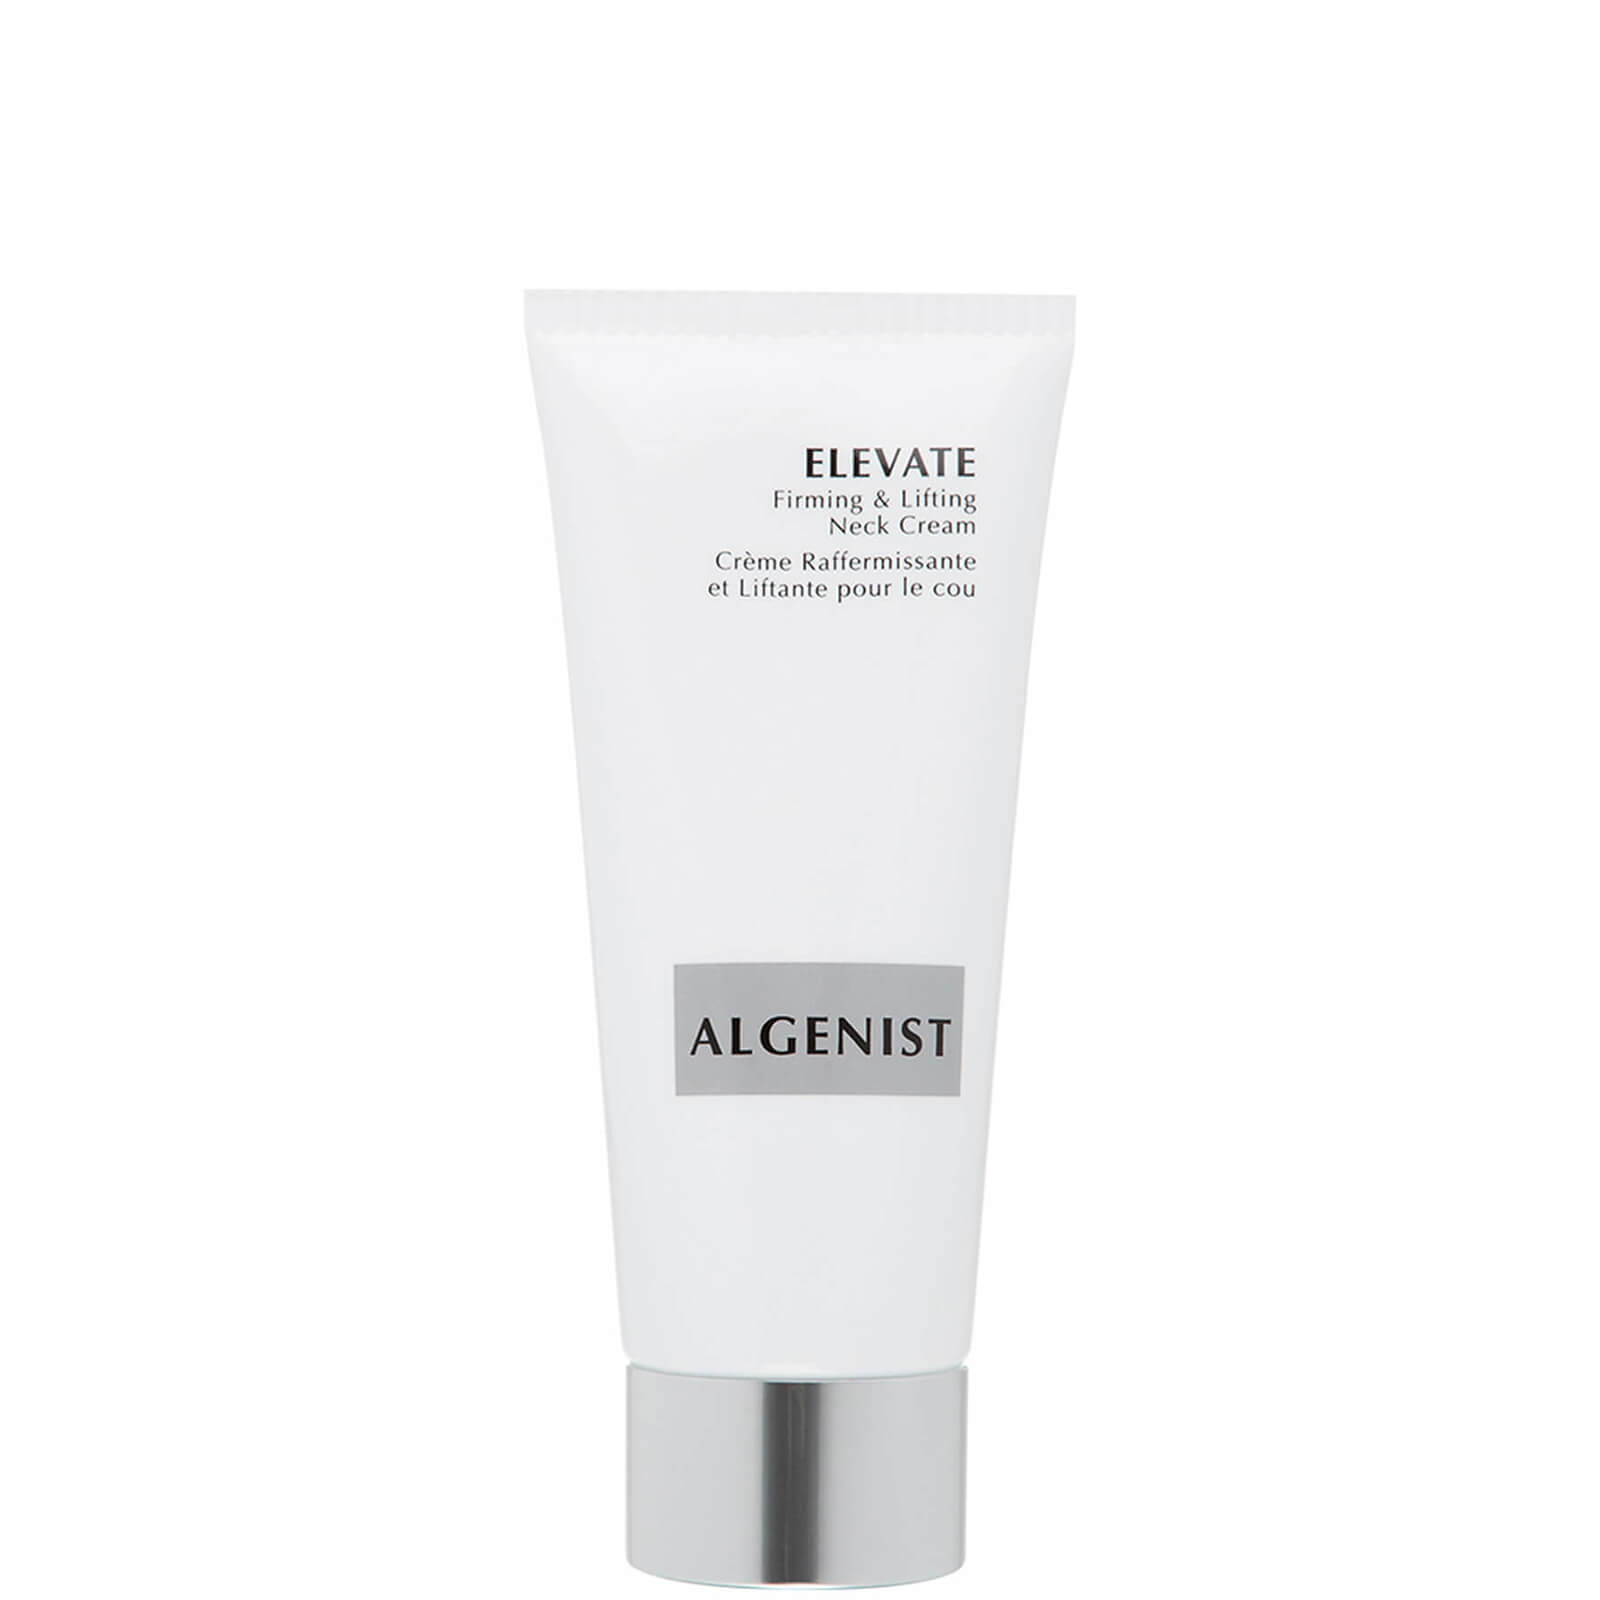 Image of ALGENIST ELEVATE Firming and Lifting Neck Cream 60ml